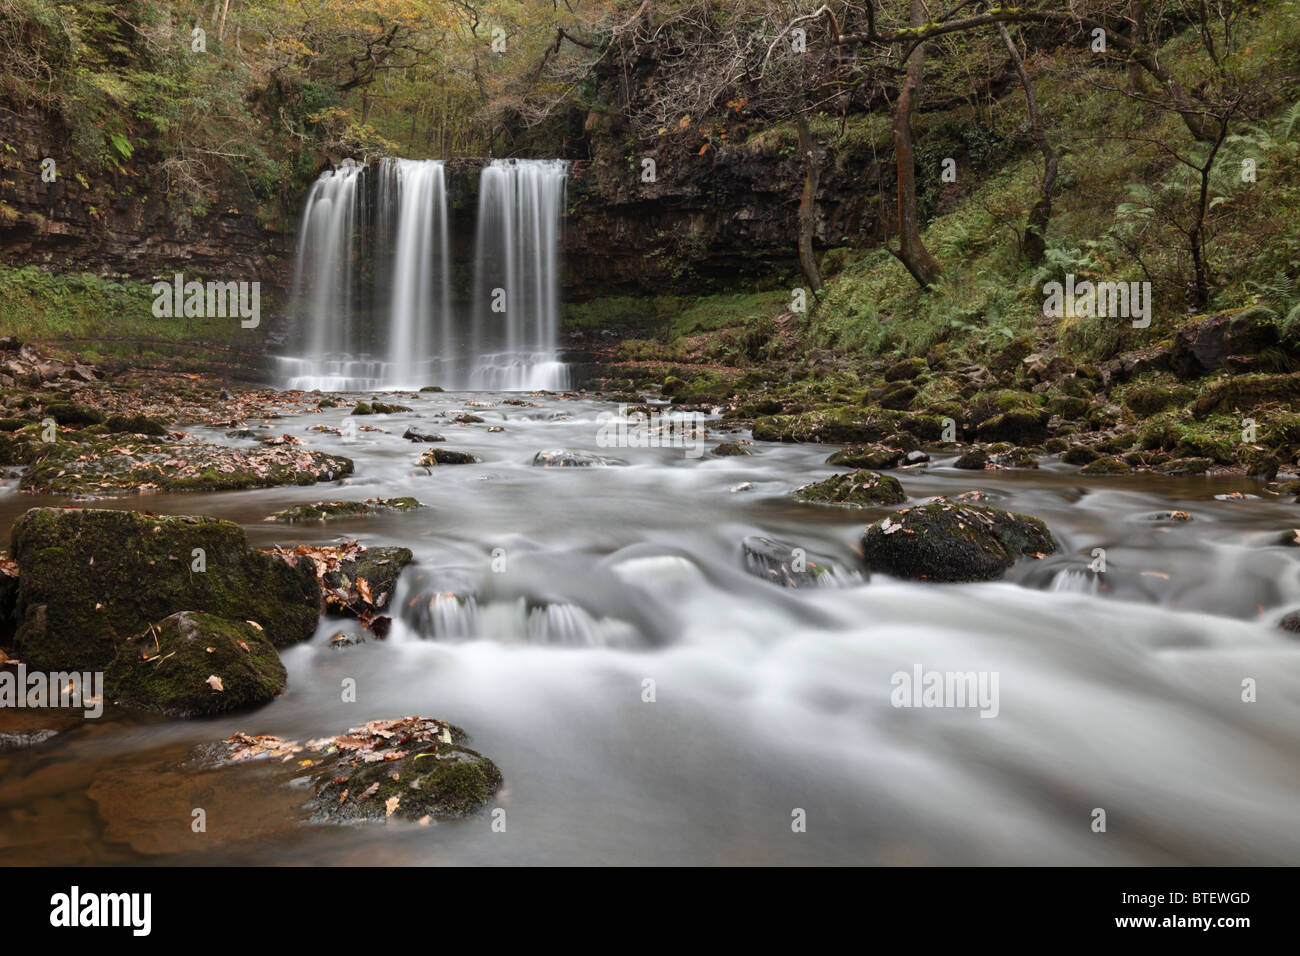 Sgwd Yr Eira Watefall on the river Hepste in the Brecon Beacons National Park captured using a long shutter speed Stock Photo